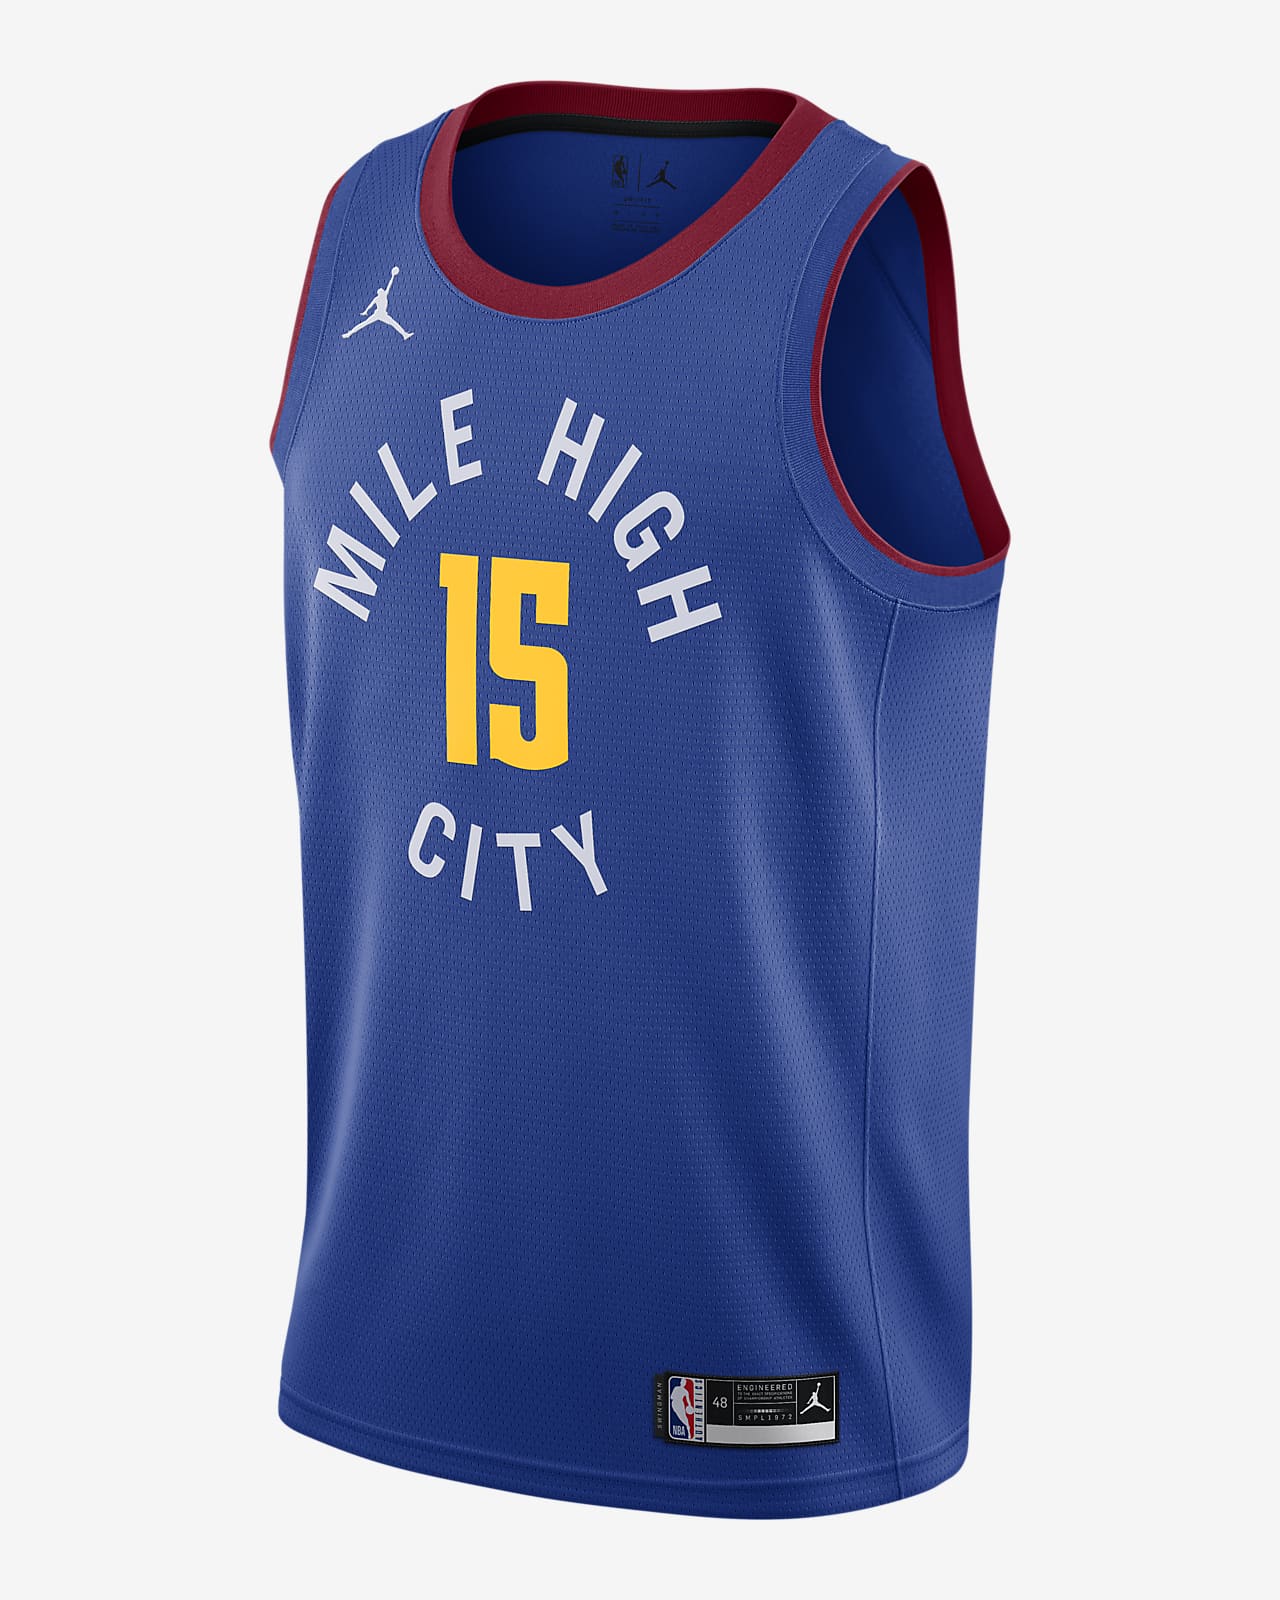 nuggets jersey